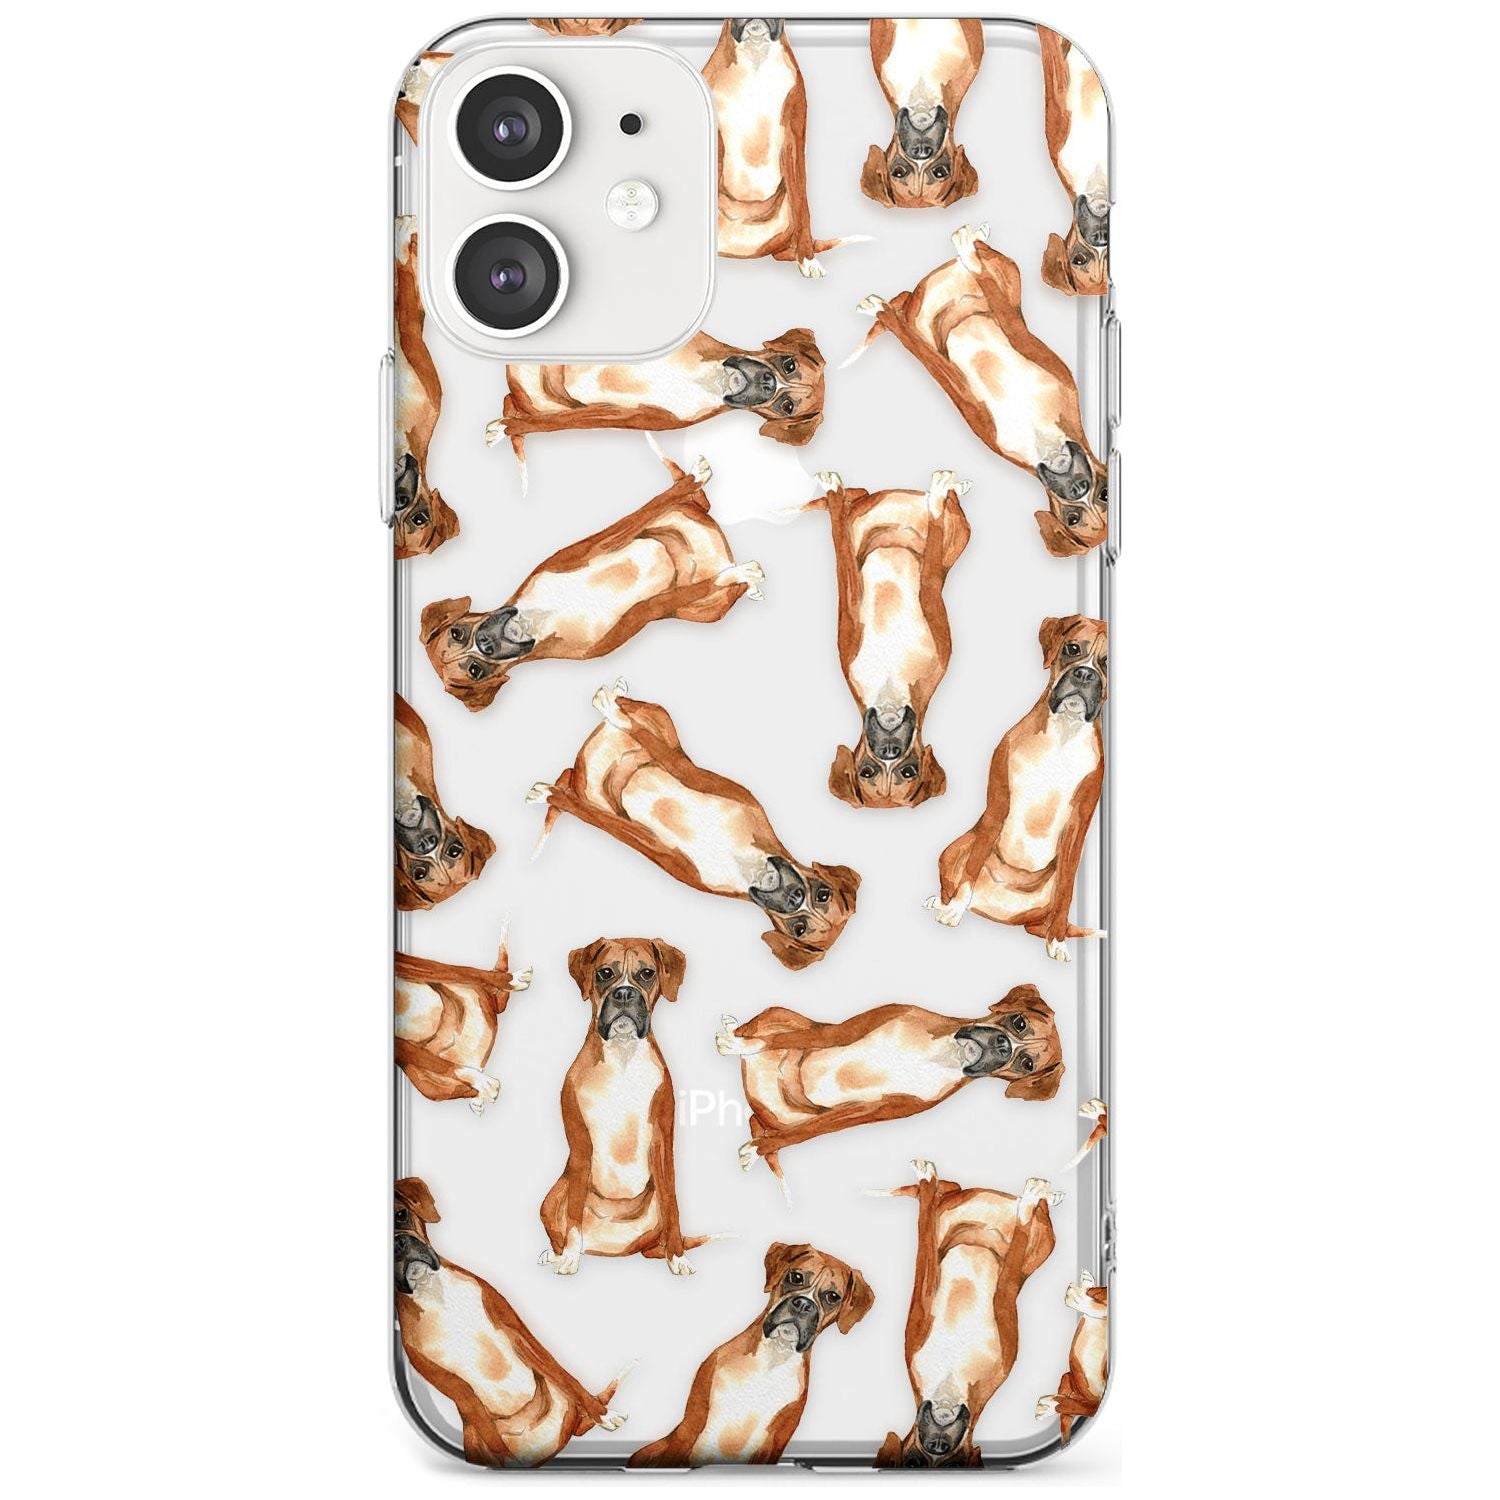 Boxer Watercolour Dog Pattern Slim TPU Phone Case for iPhone 11